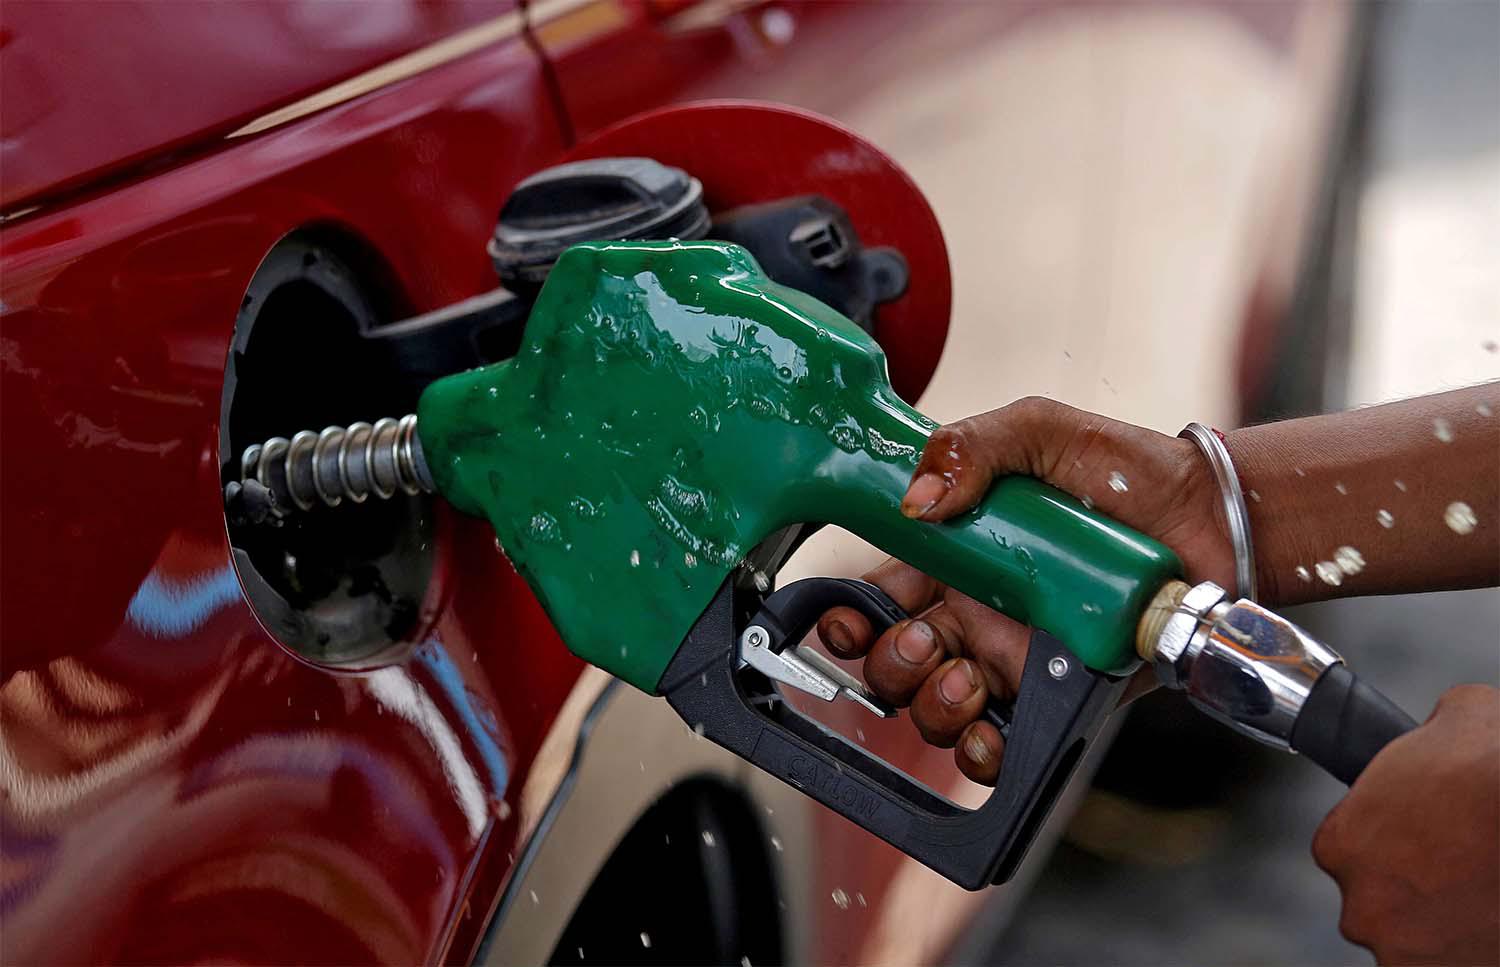 Demand for oil products like gasoline and jet fuel is getting stronger